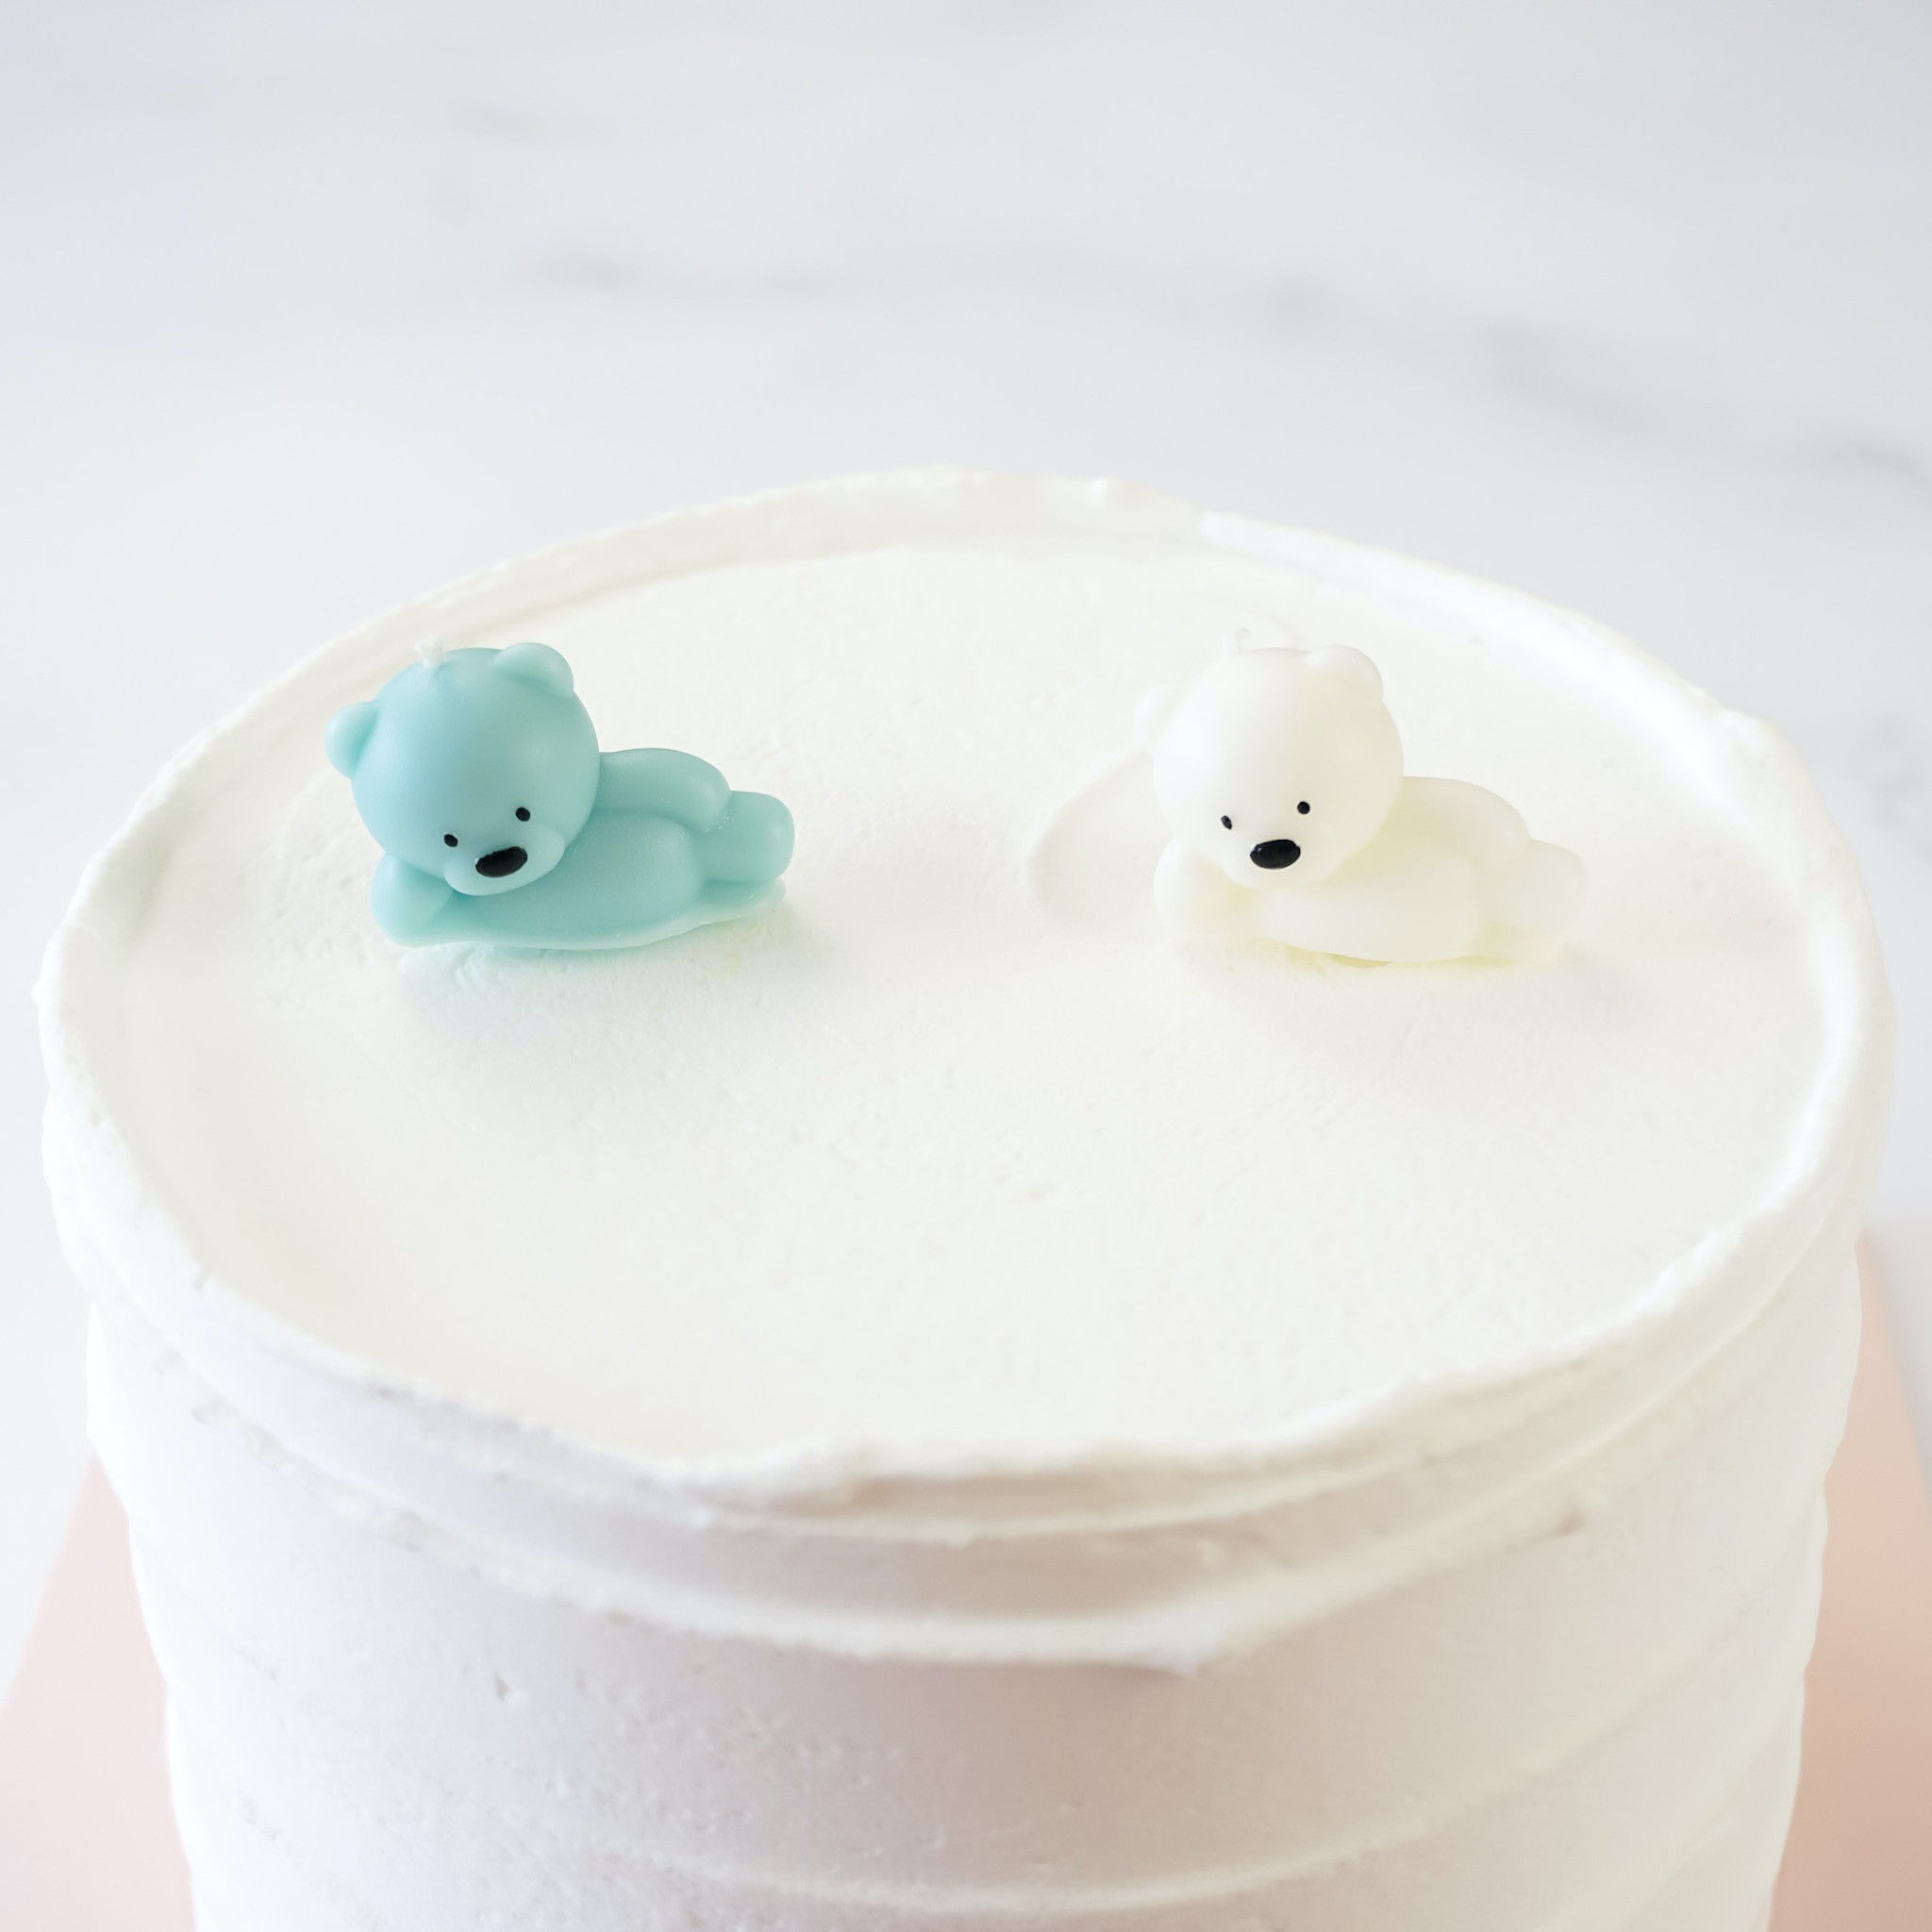 birthday cake candles in white and mint